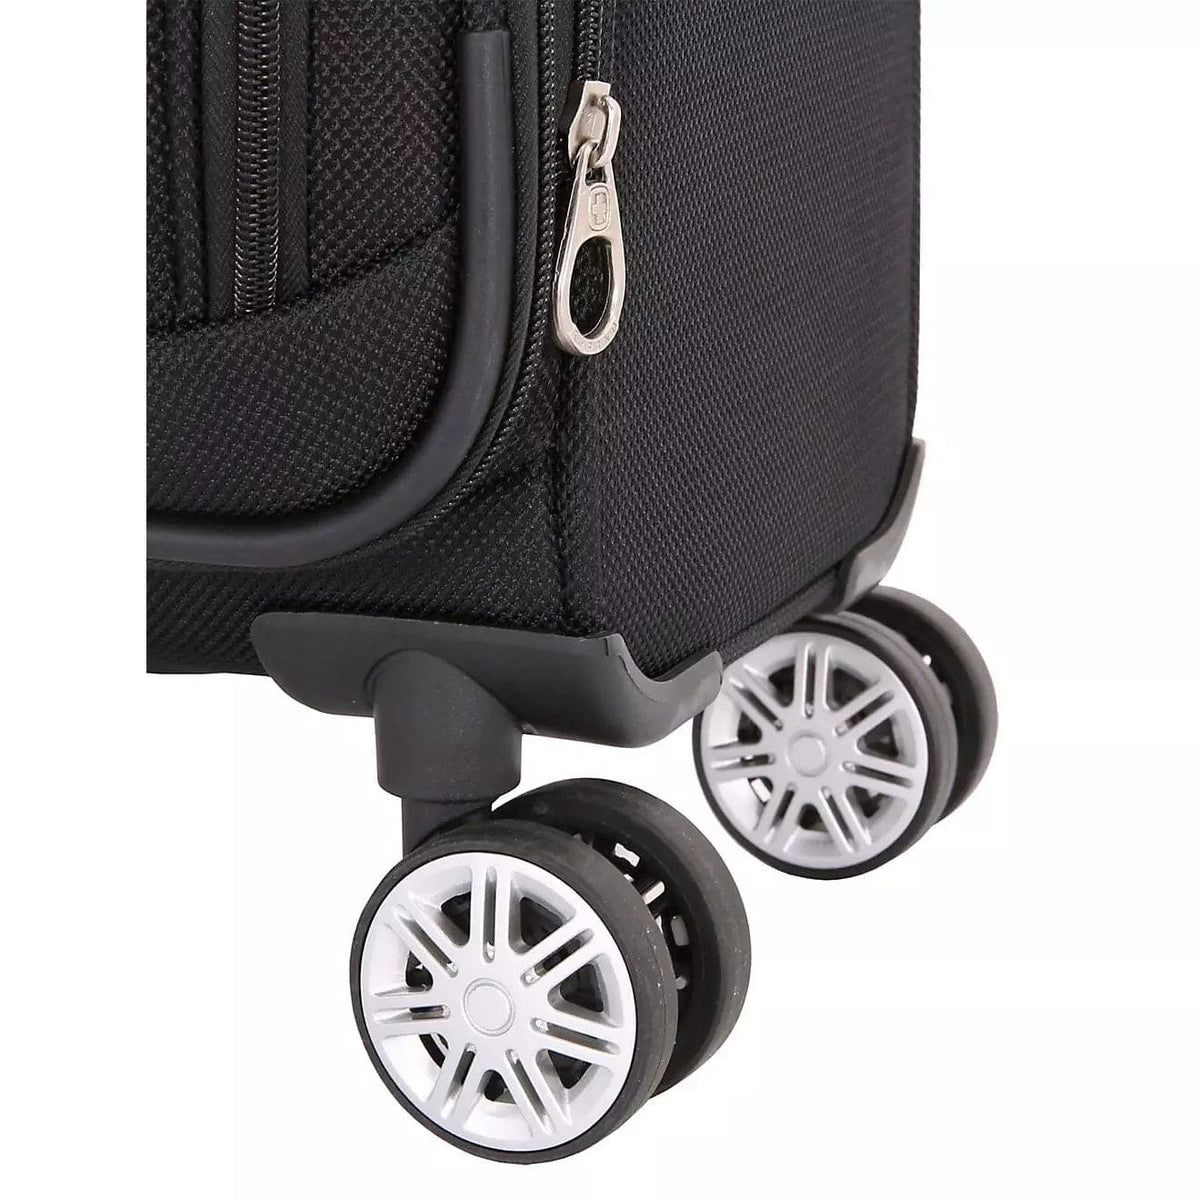 SwissGear Spinner Carry-On Luggage